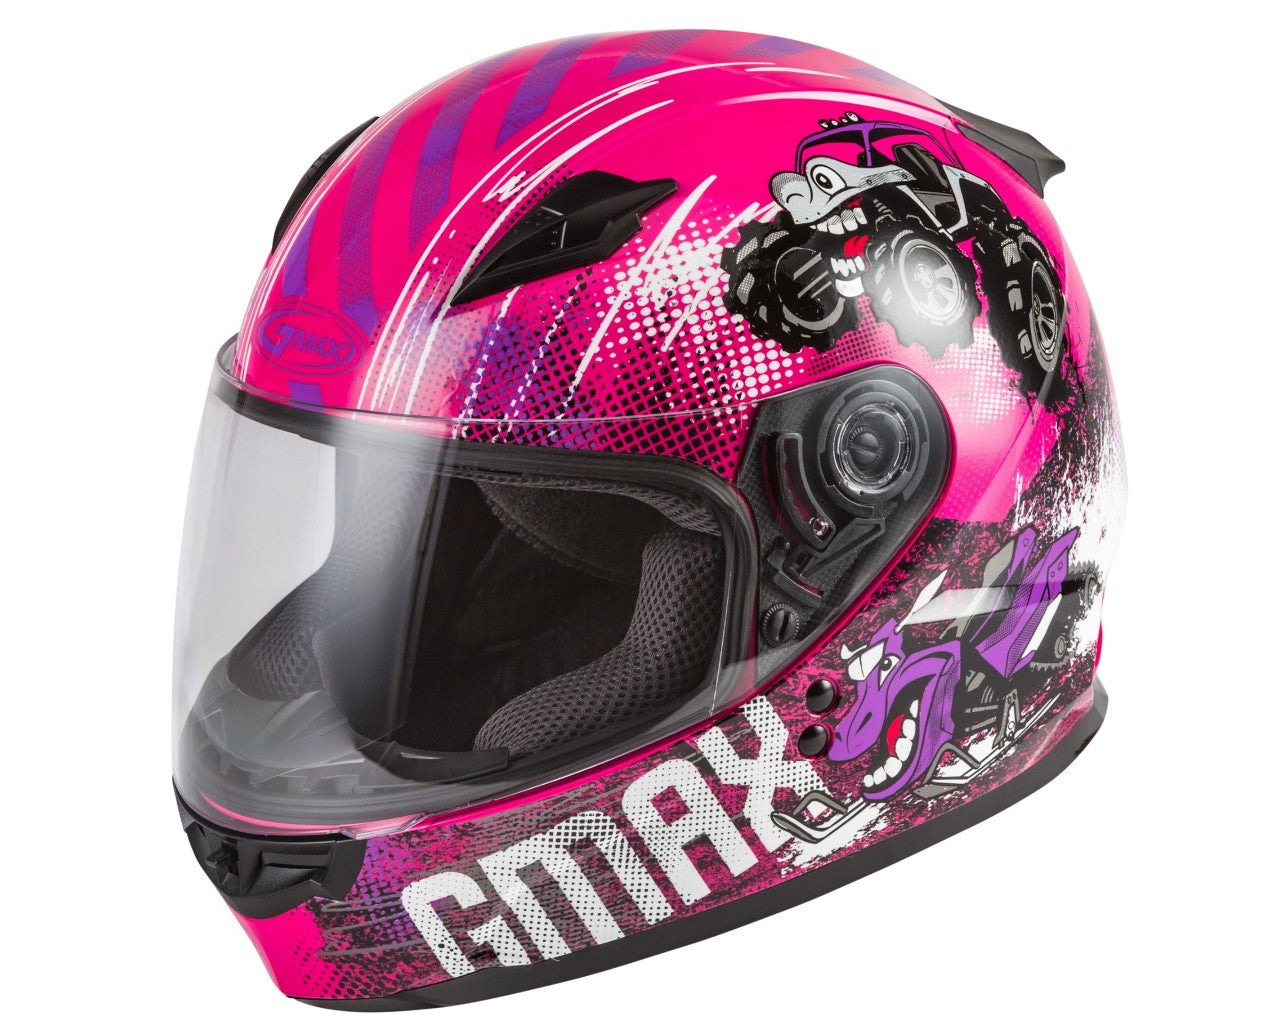 GMAX GM-49Y Beasts Youth Full-Face Helmet Pink Large 72-4996YL